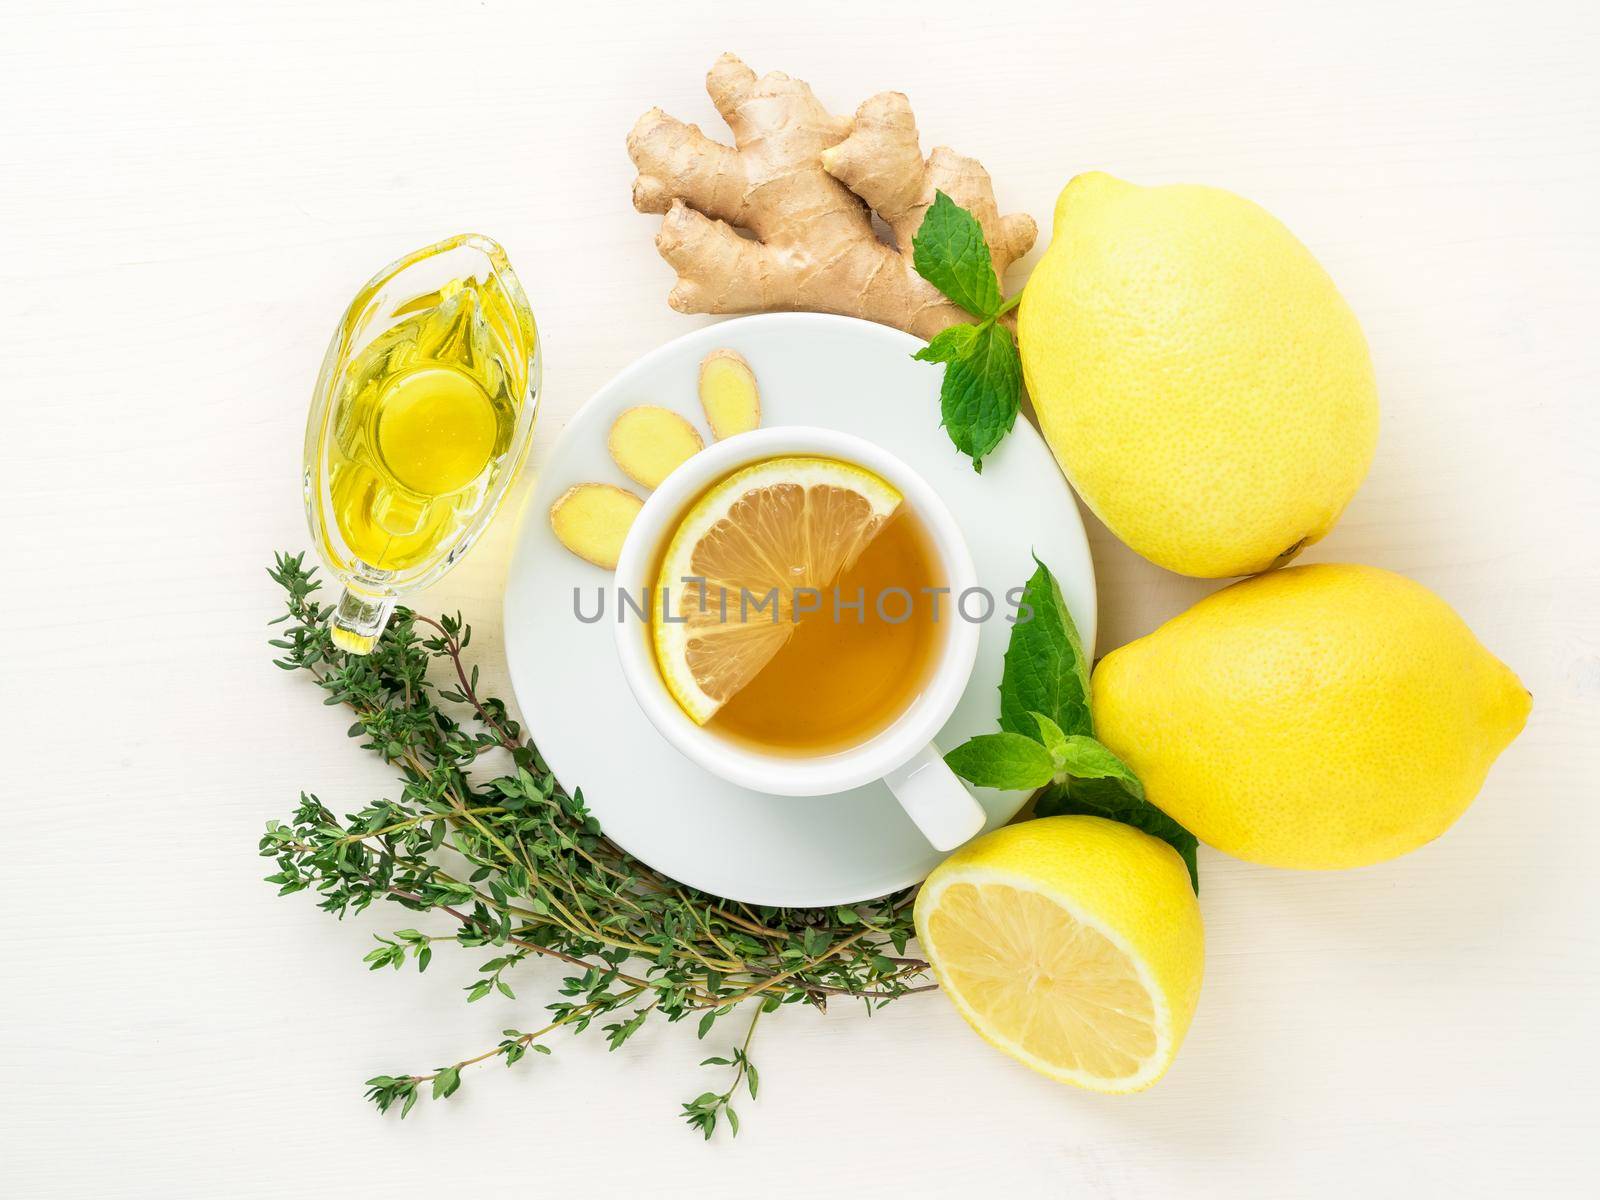 Folk ways to treat colds - cup of tea and a slice of lemon, ginger, mint, honey, herbs, whole lemons and half on a white background, top view.